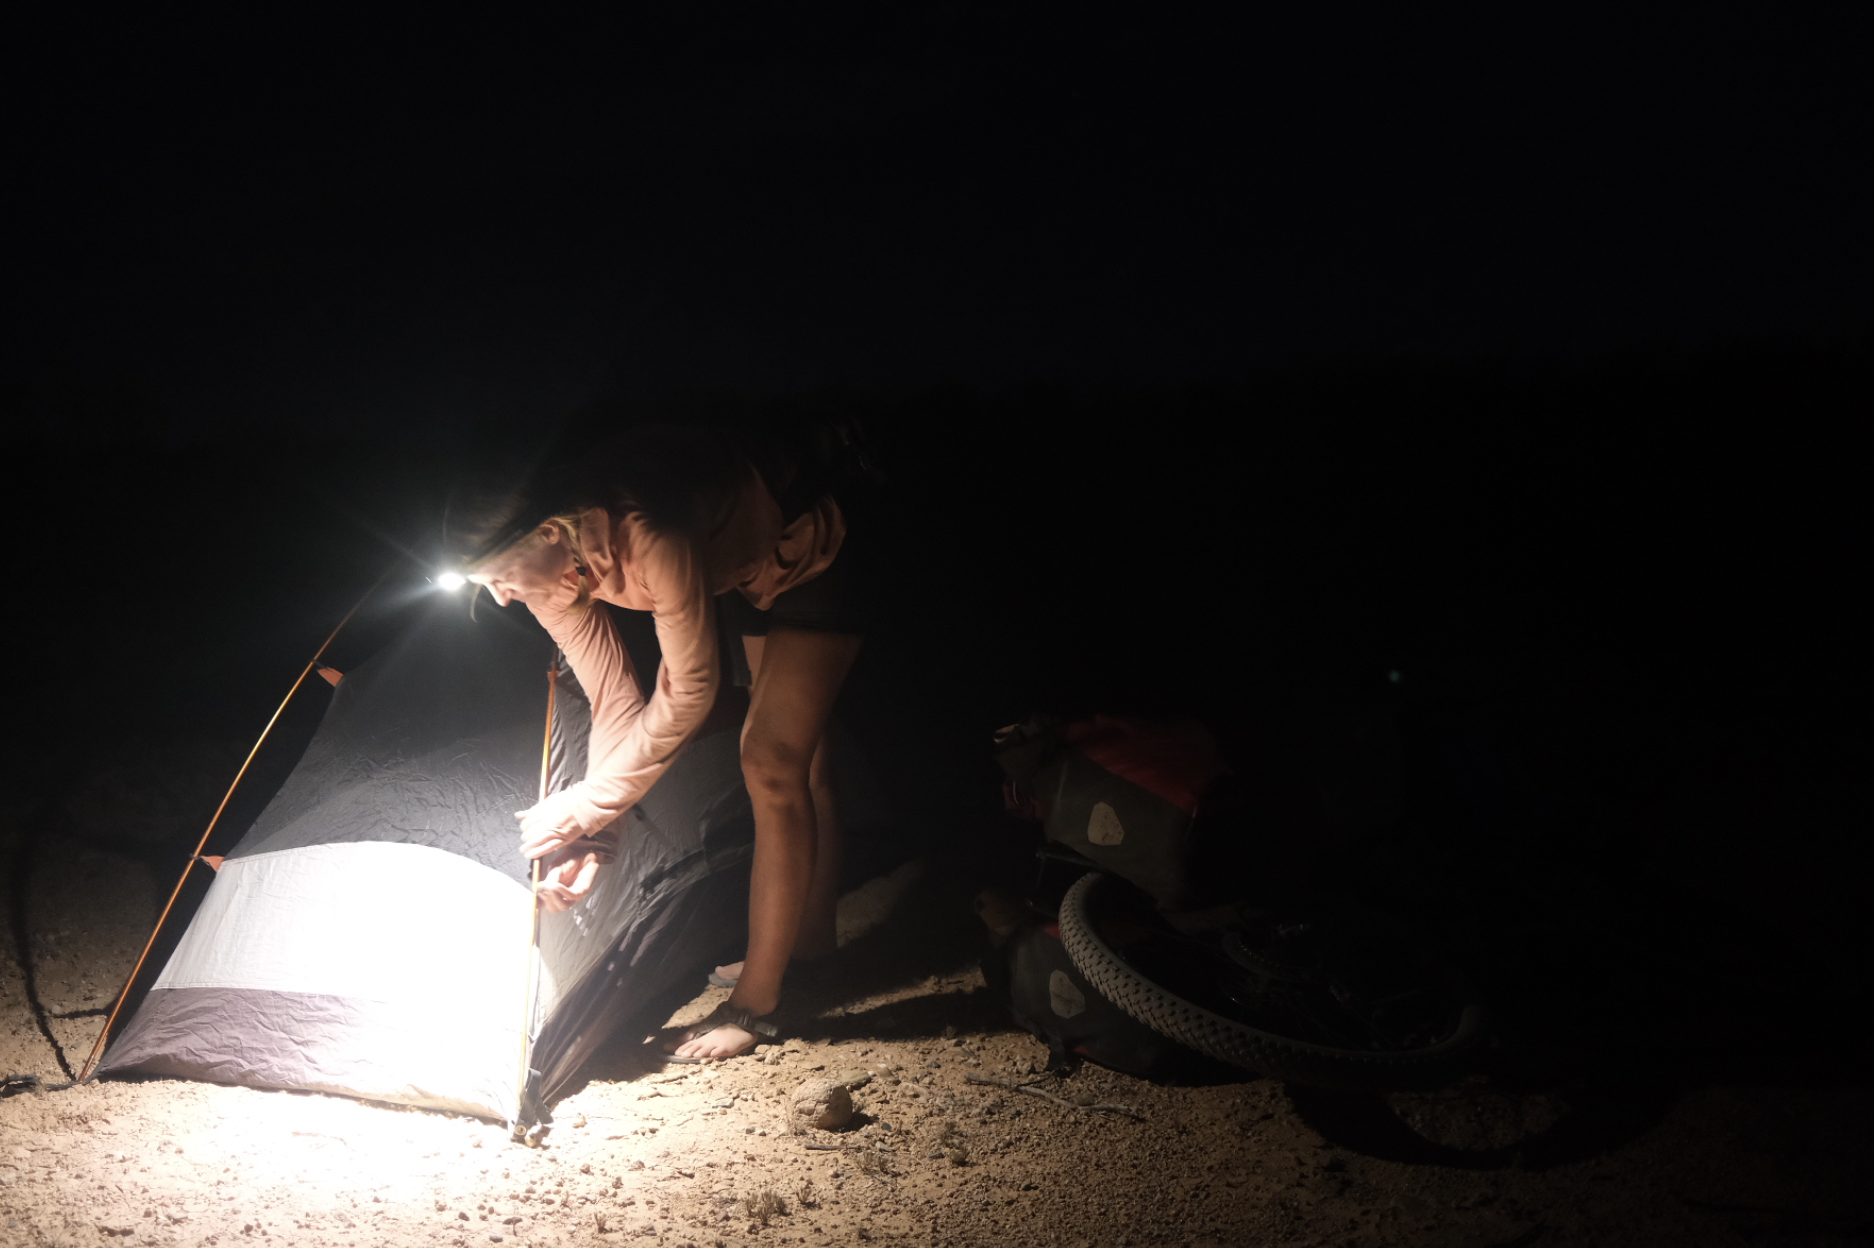 setting up a tent in the dark by headlamp